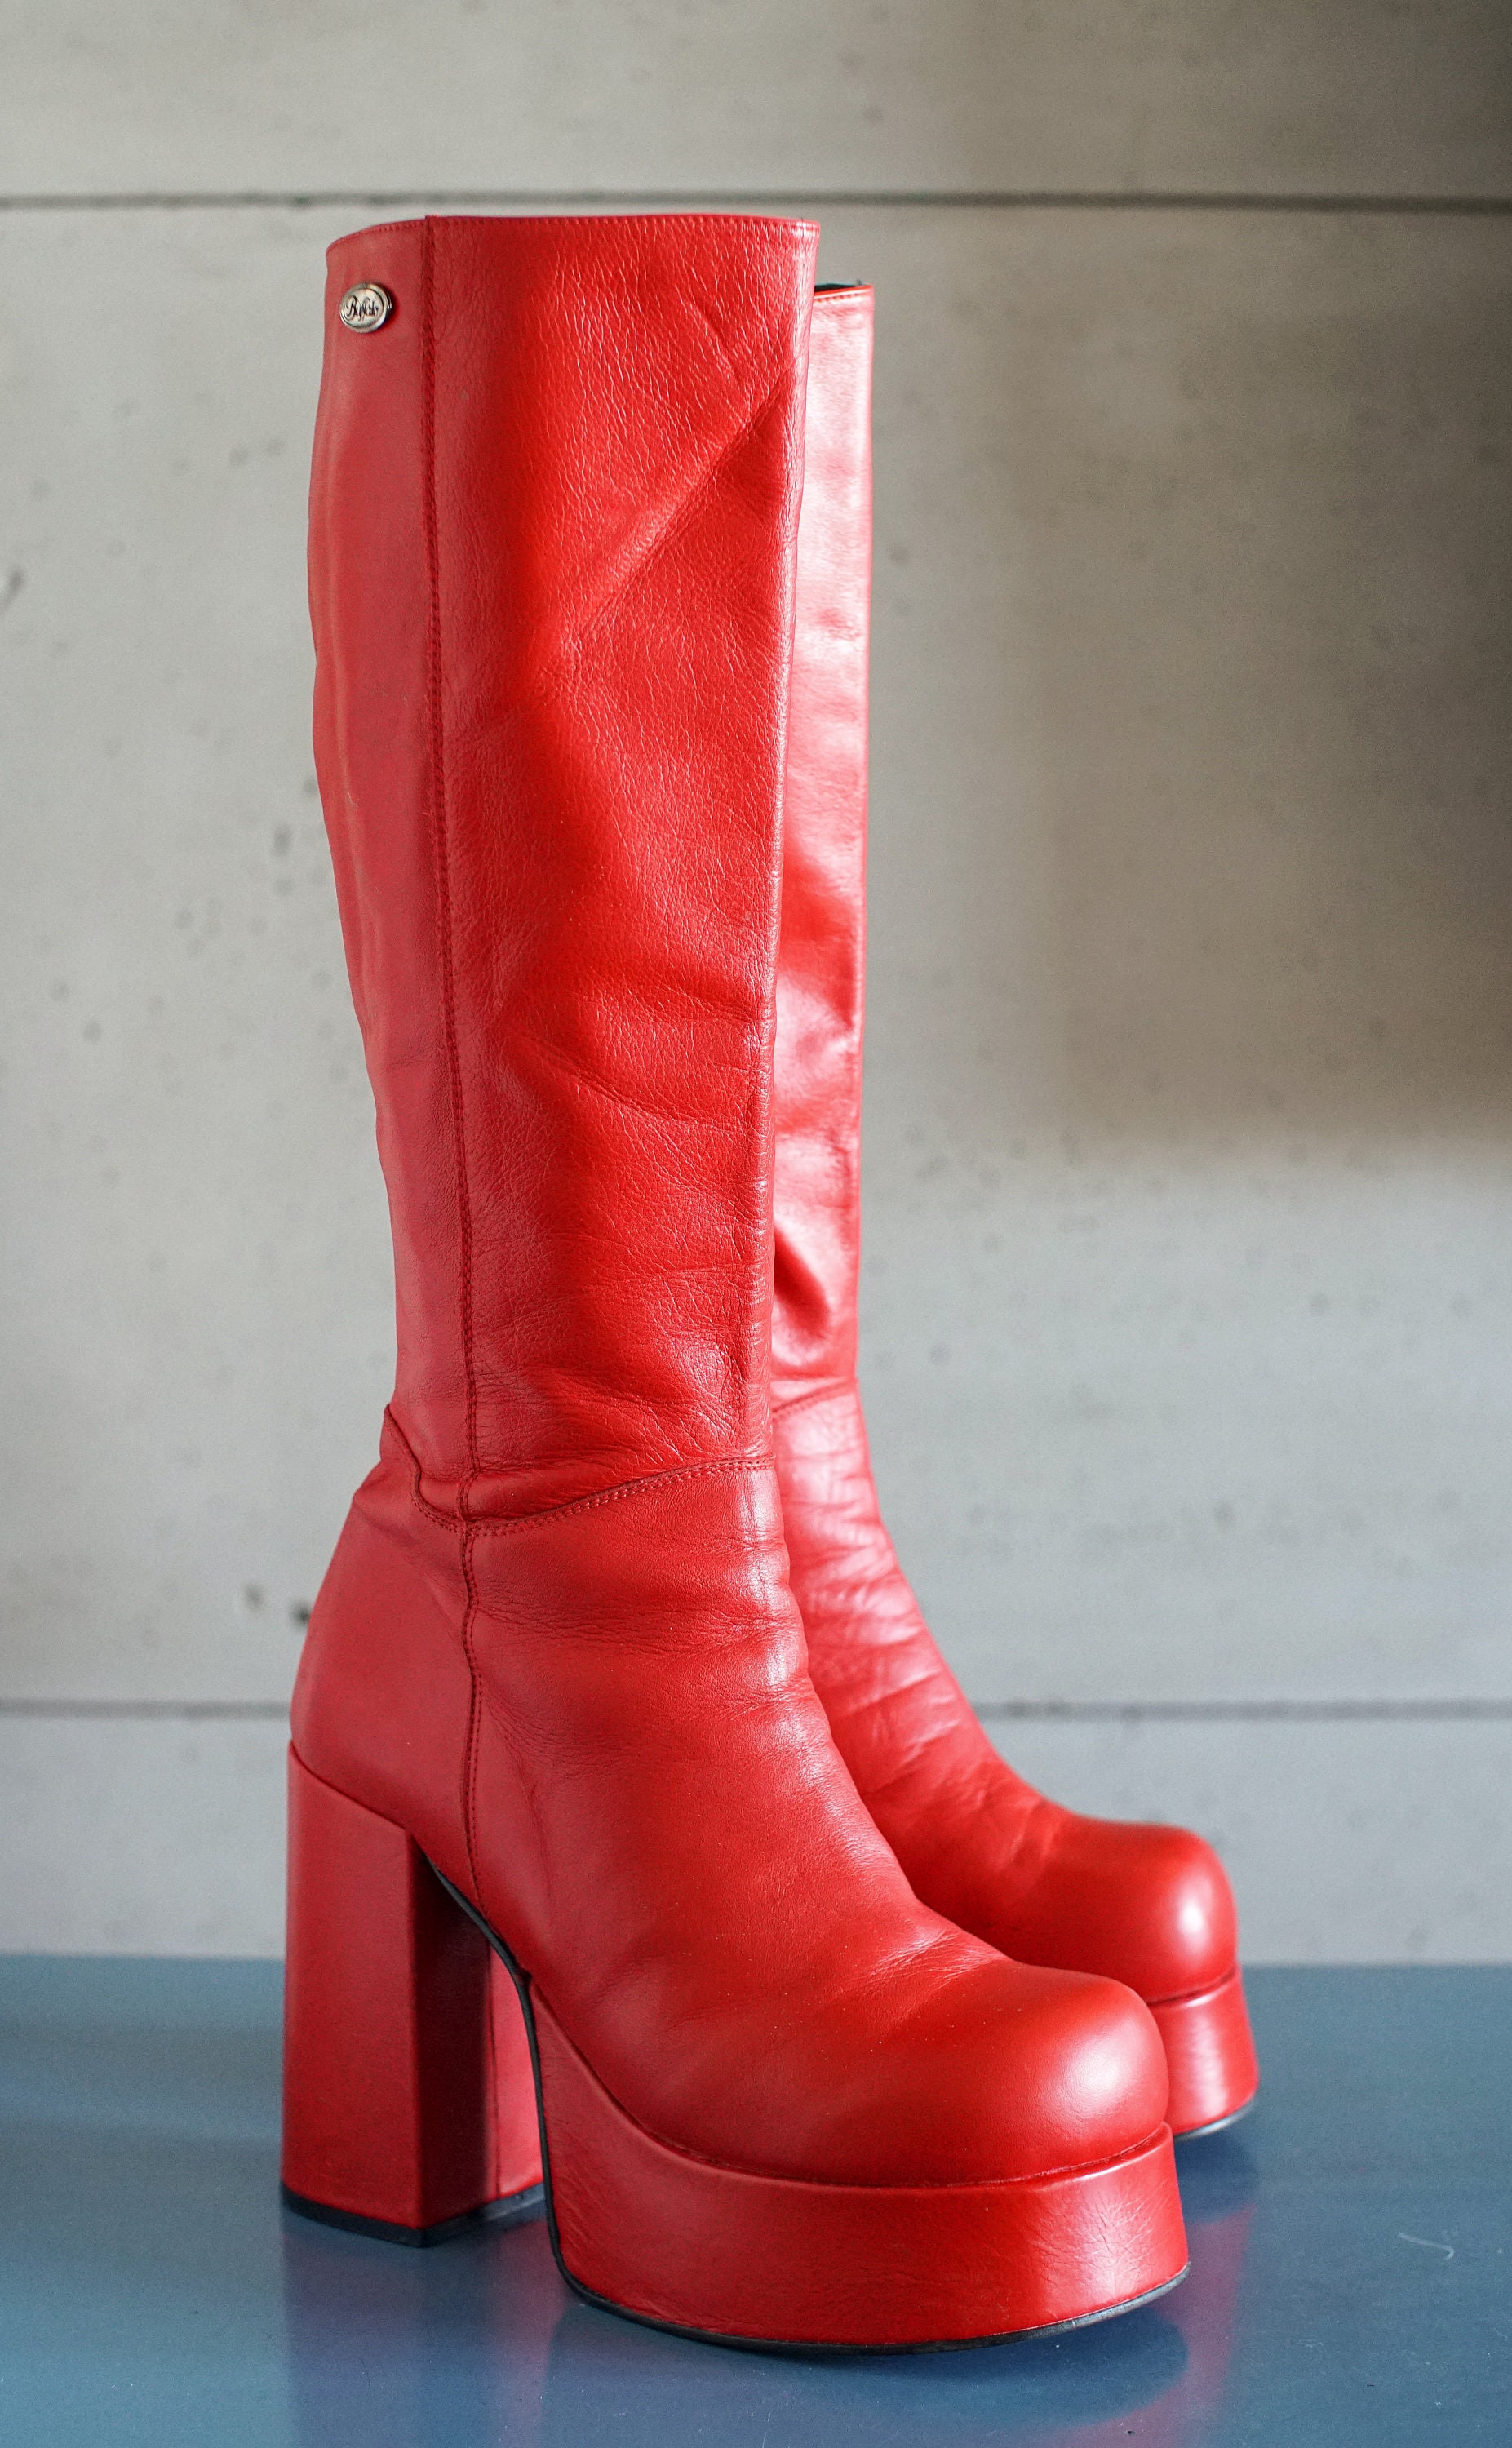 T-24400 CULT 40 Red Boots 90's Club Kid - Etsy